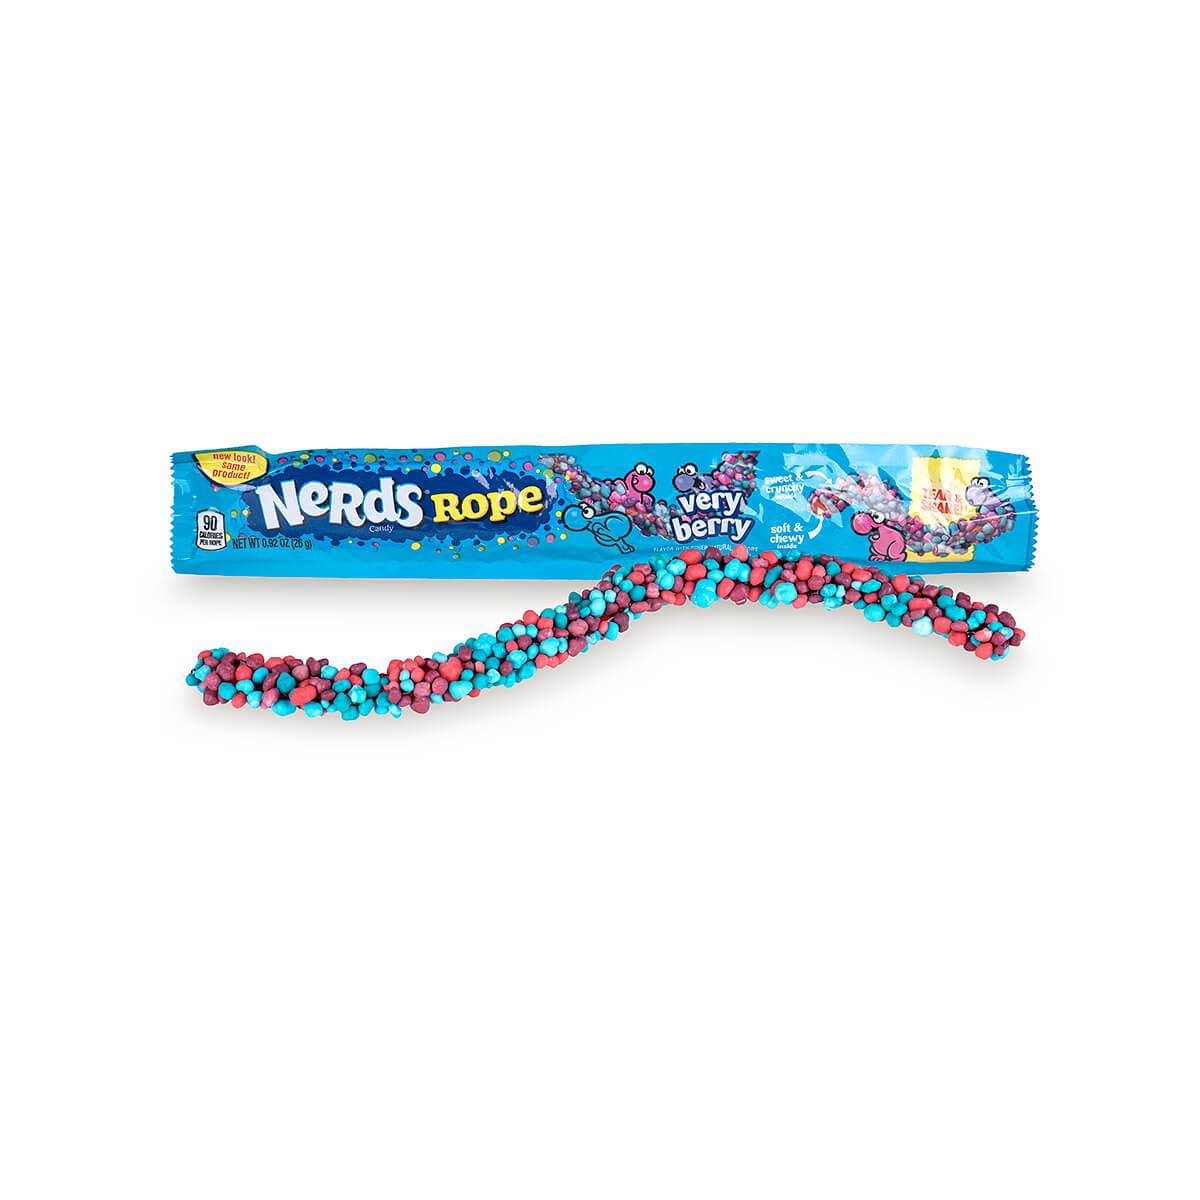  Very Berry Nerds Rope Candy